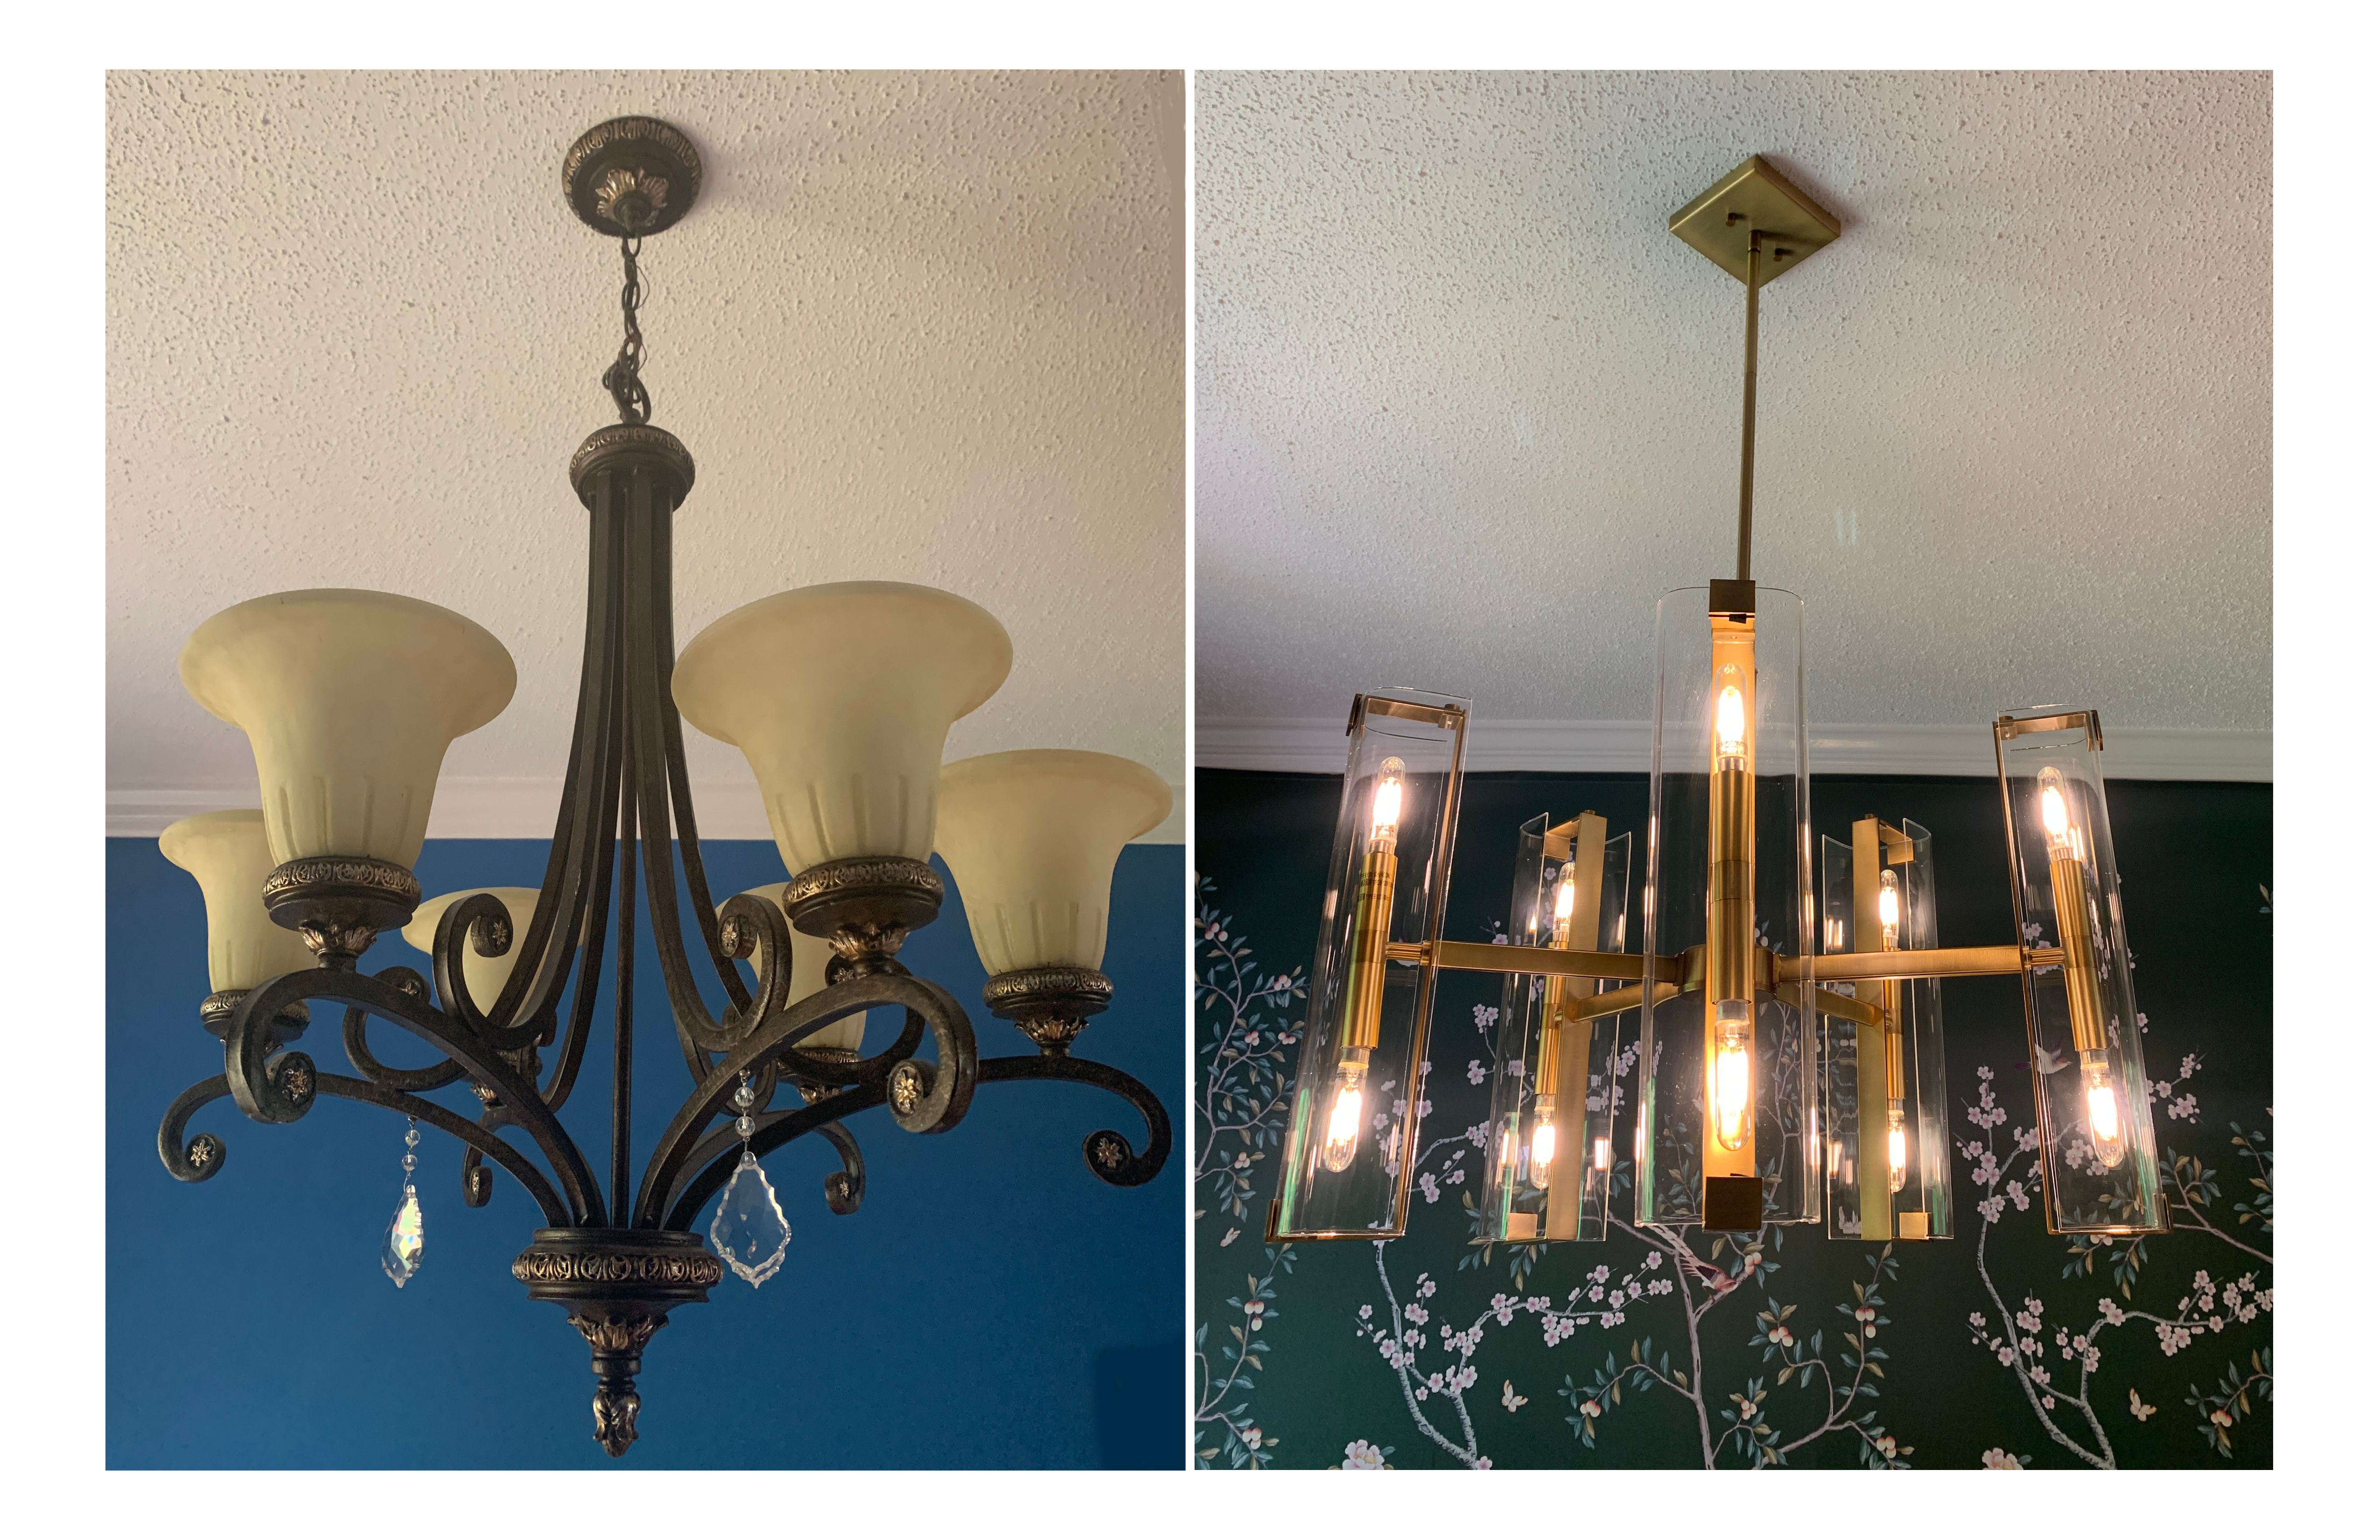 How To Replace A Chandelier How to Change a Light Fixture Without Hiring an Electrician